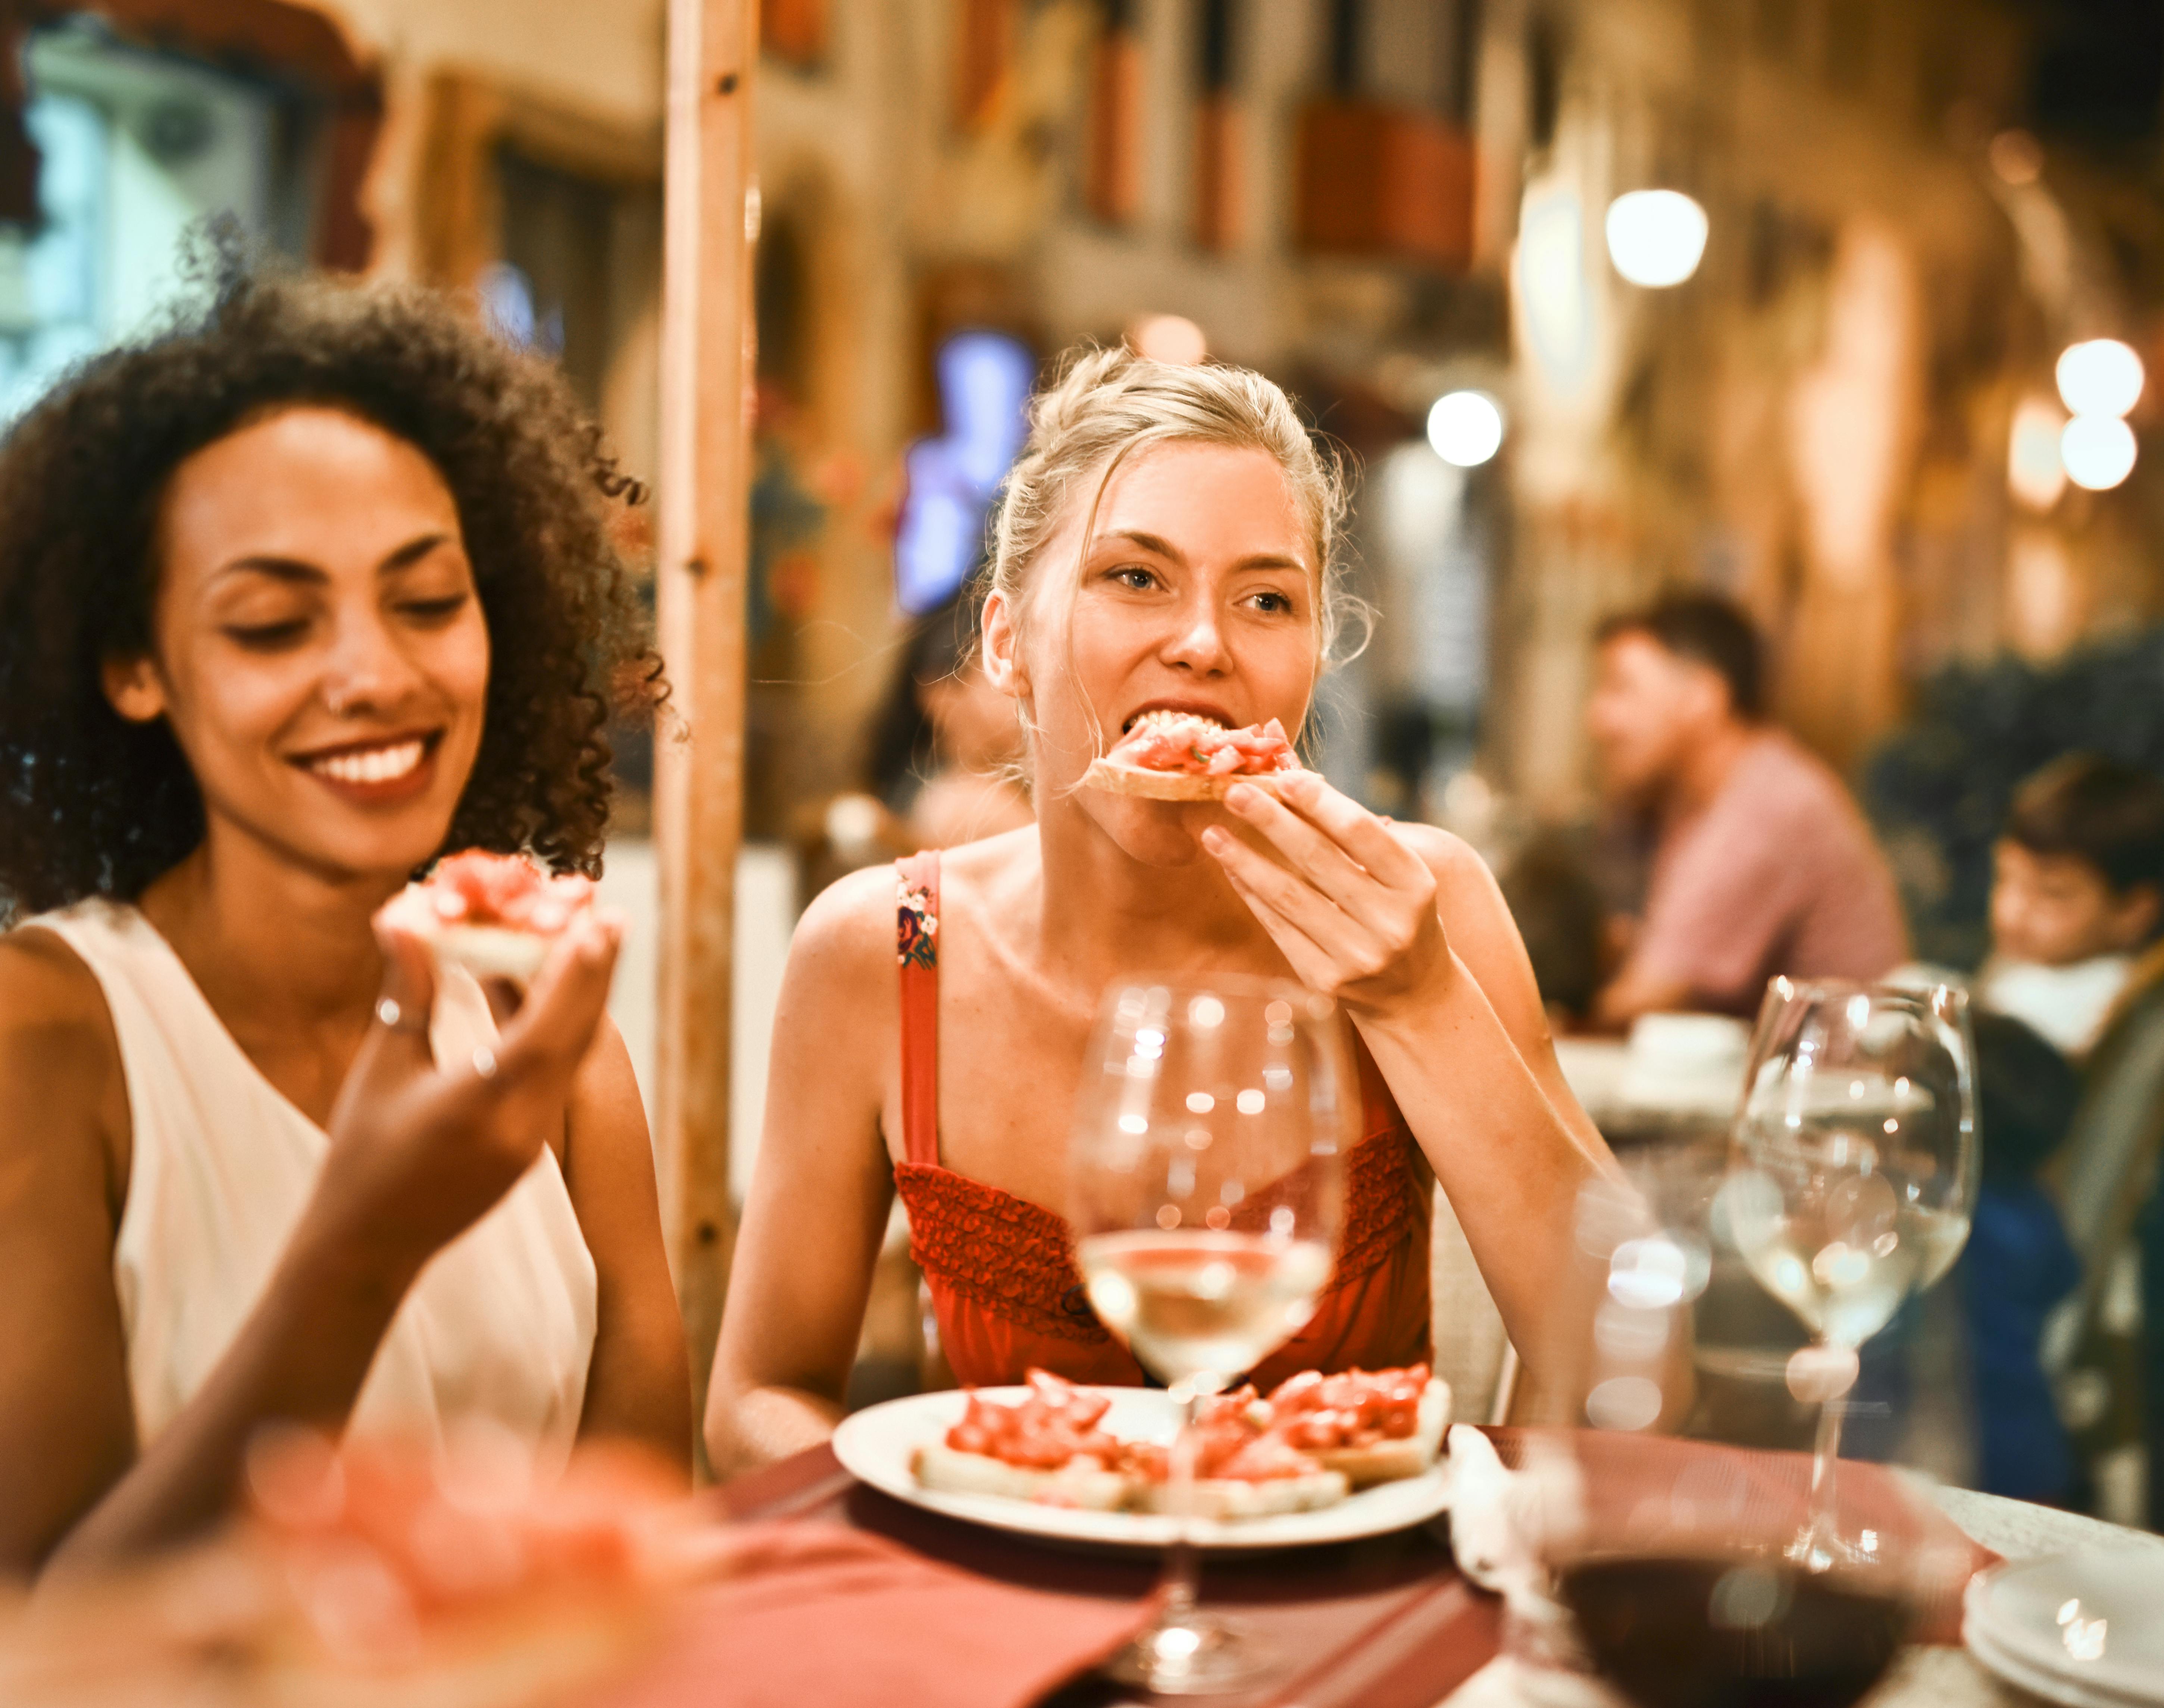 Crowded restaurant | Source: Pexels